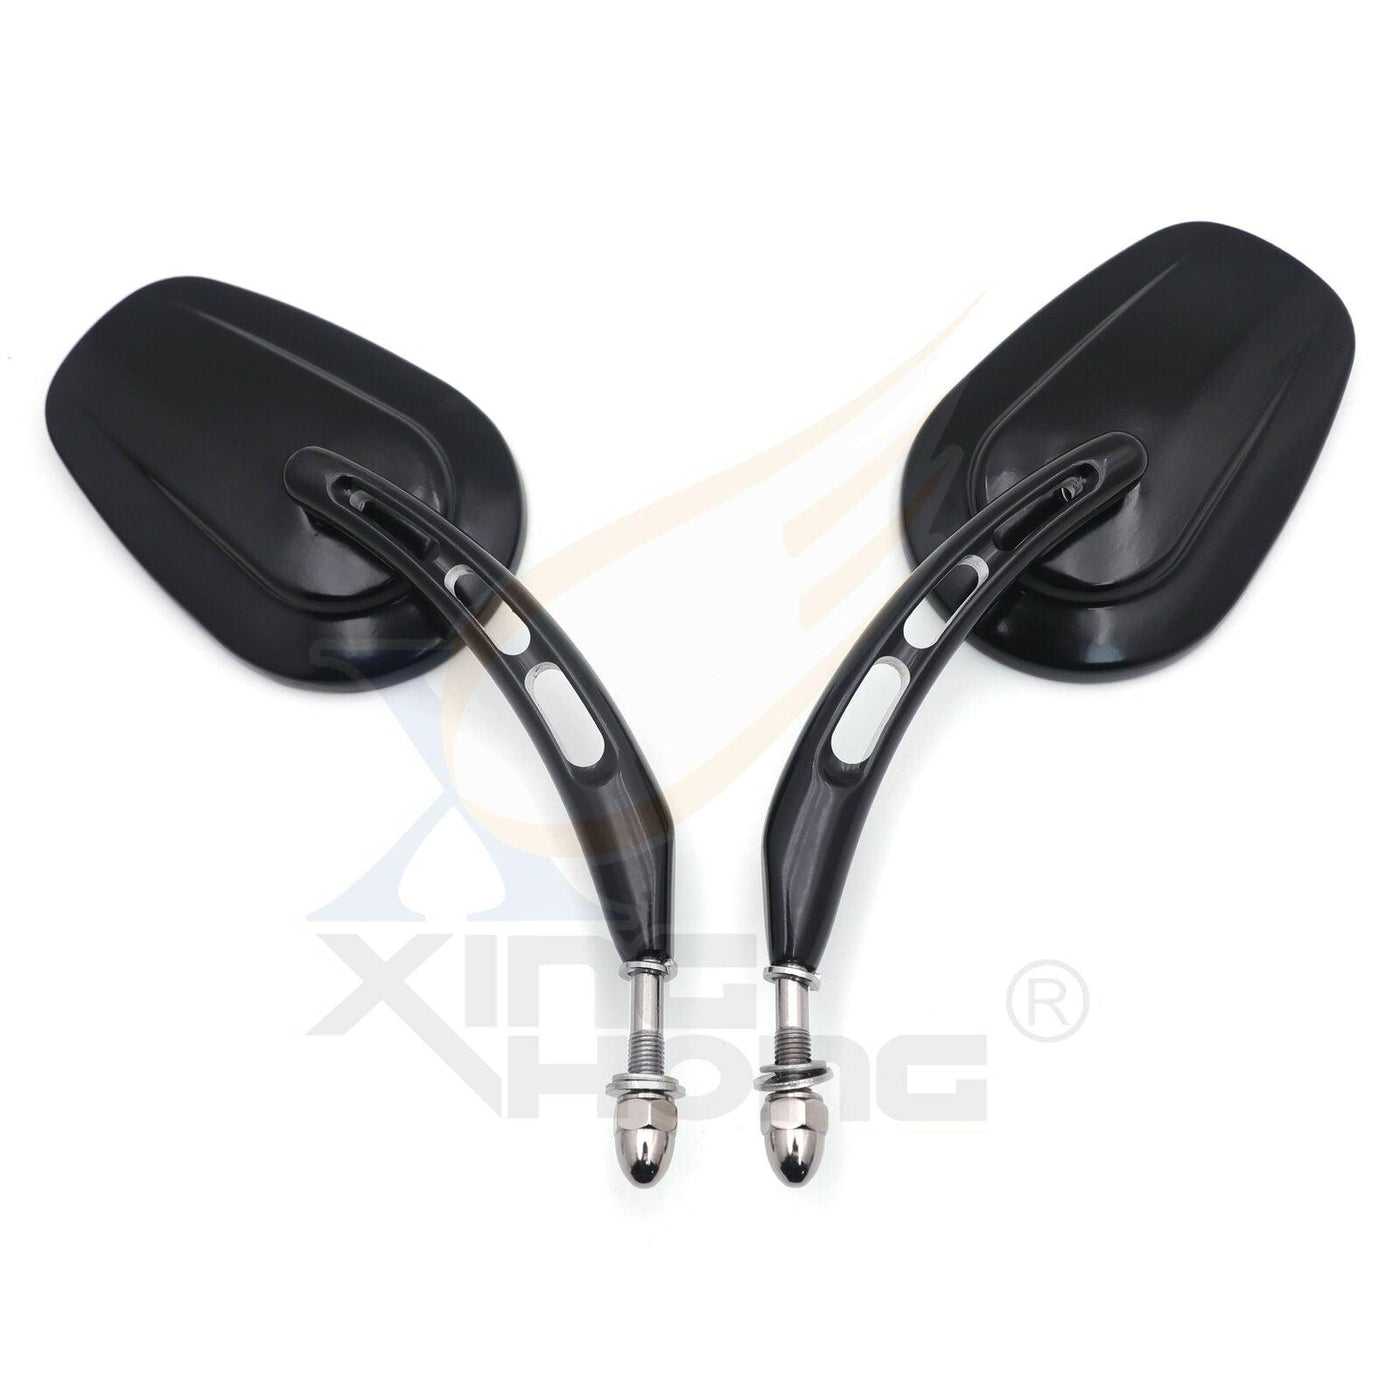 Black Big Side Mirrors For 1982-later Harley Night Train FXSTB Springer Softail - Moto Life Products